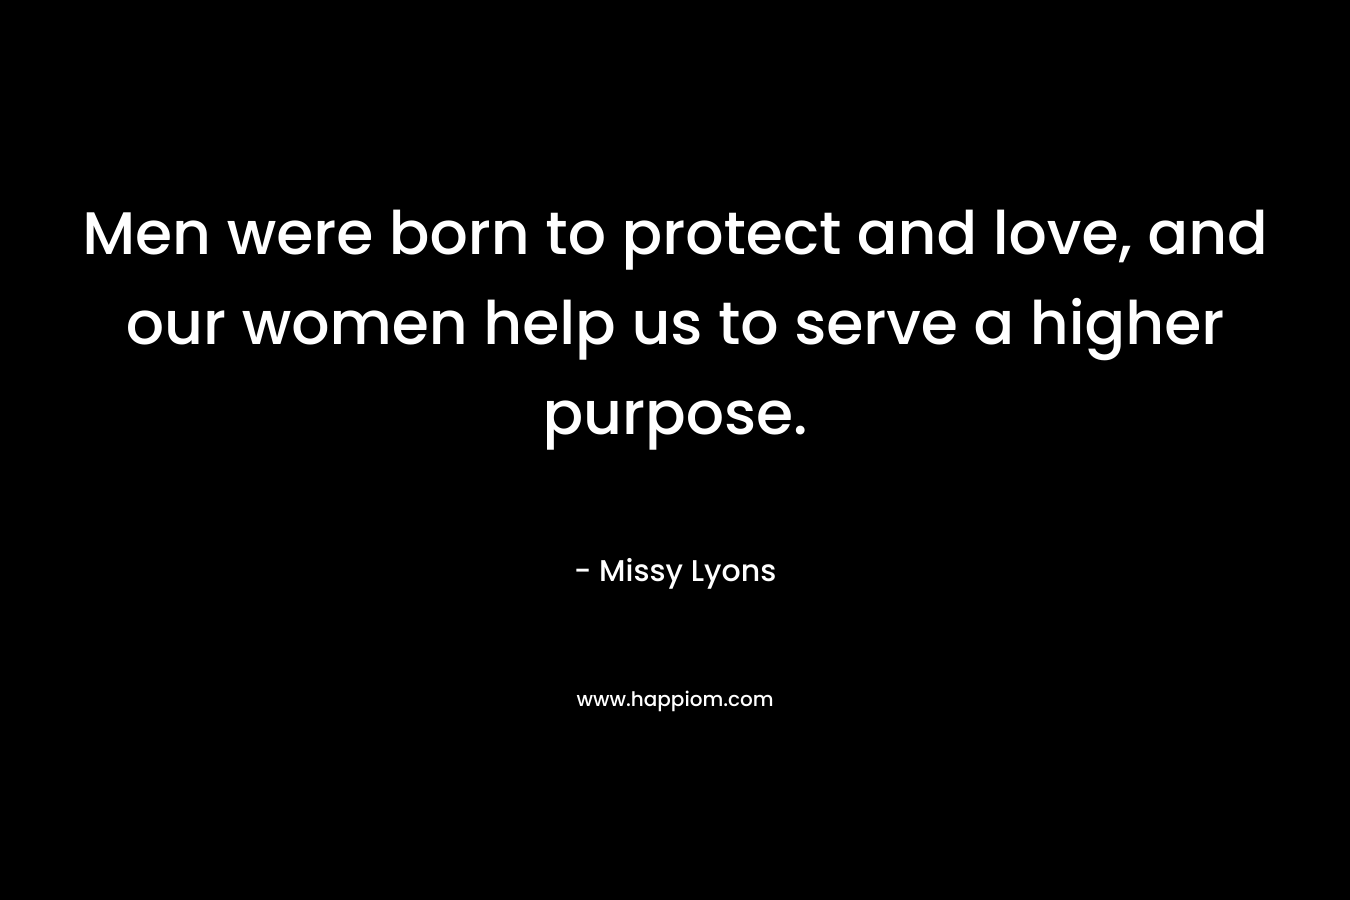 Men were born to protect and love, and our women help us to serve a higher purpose.